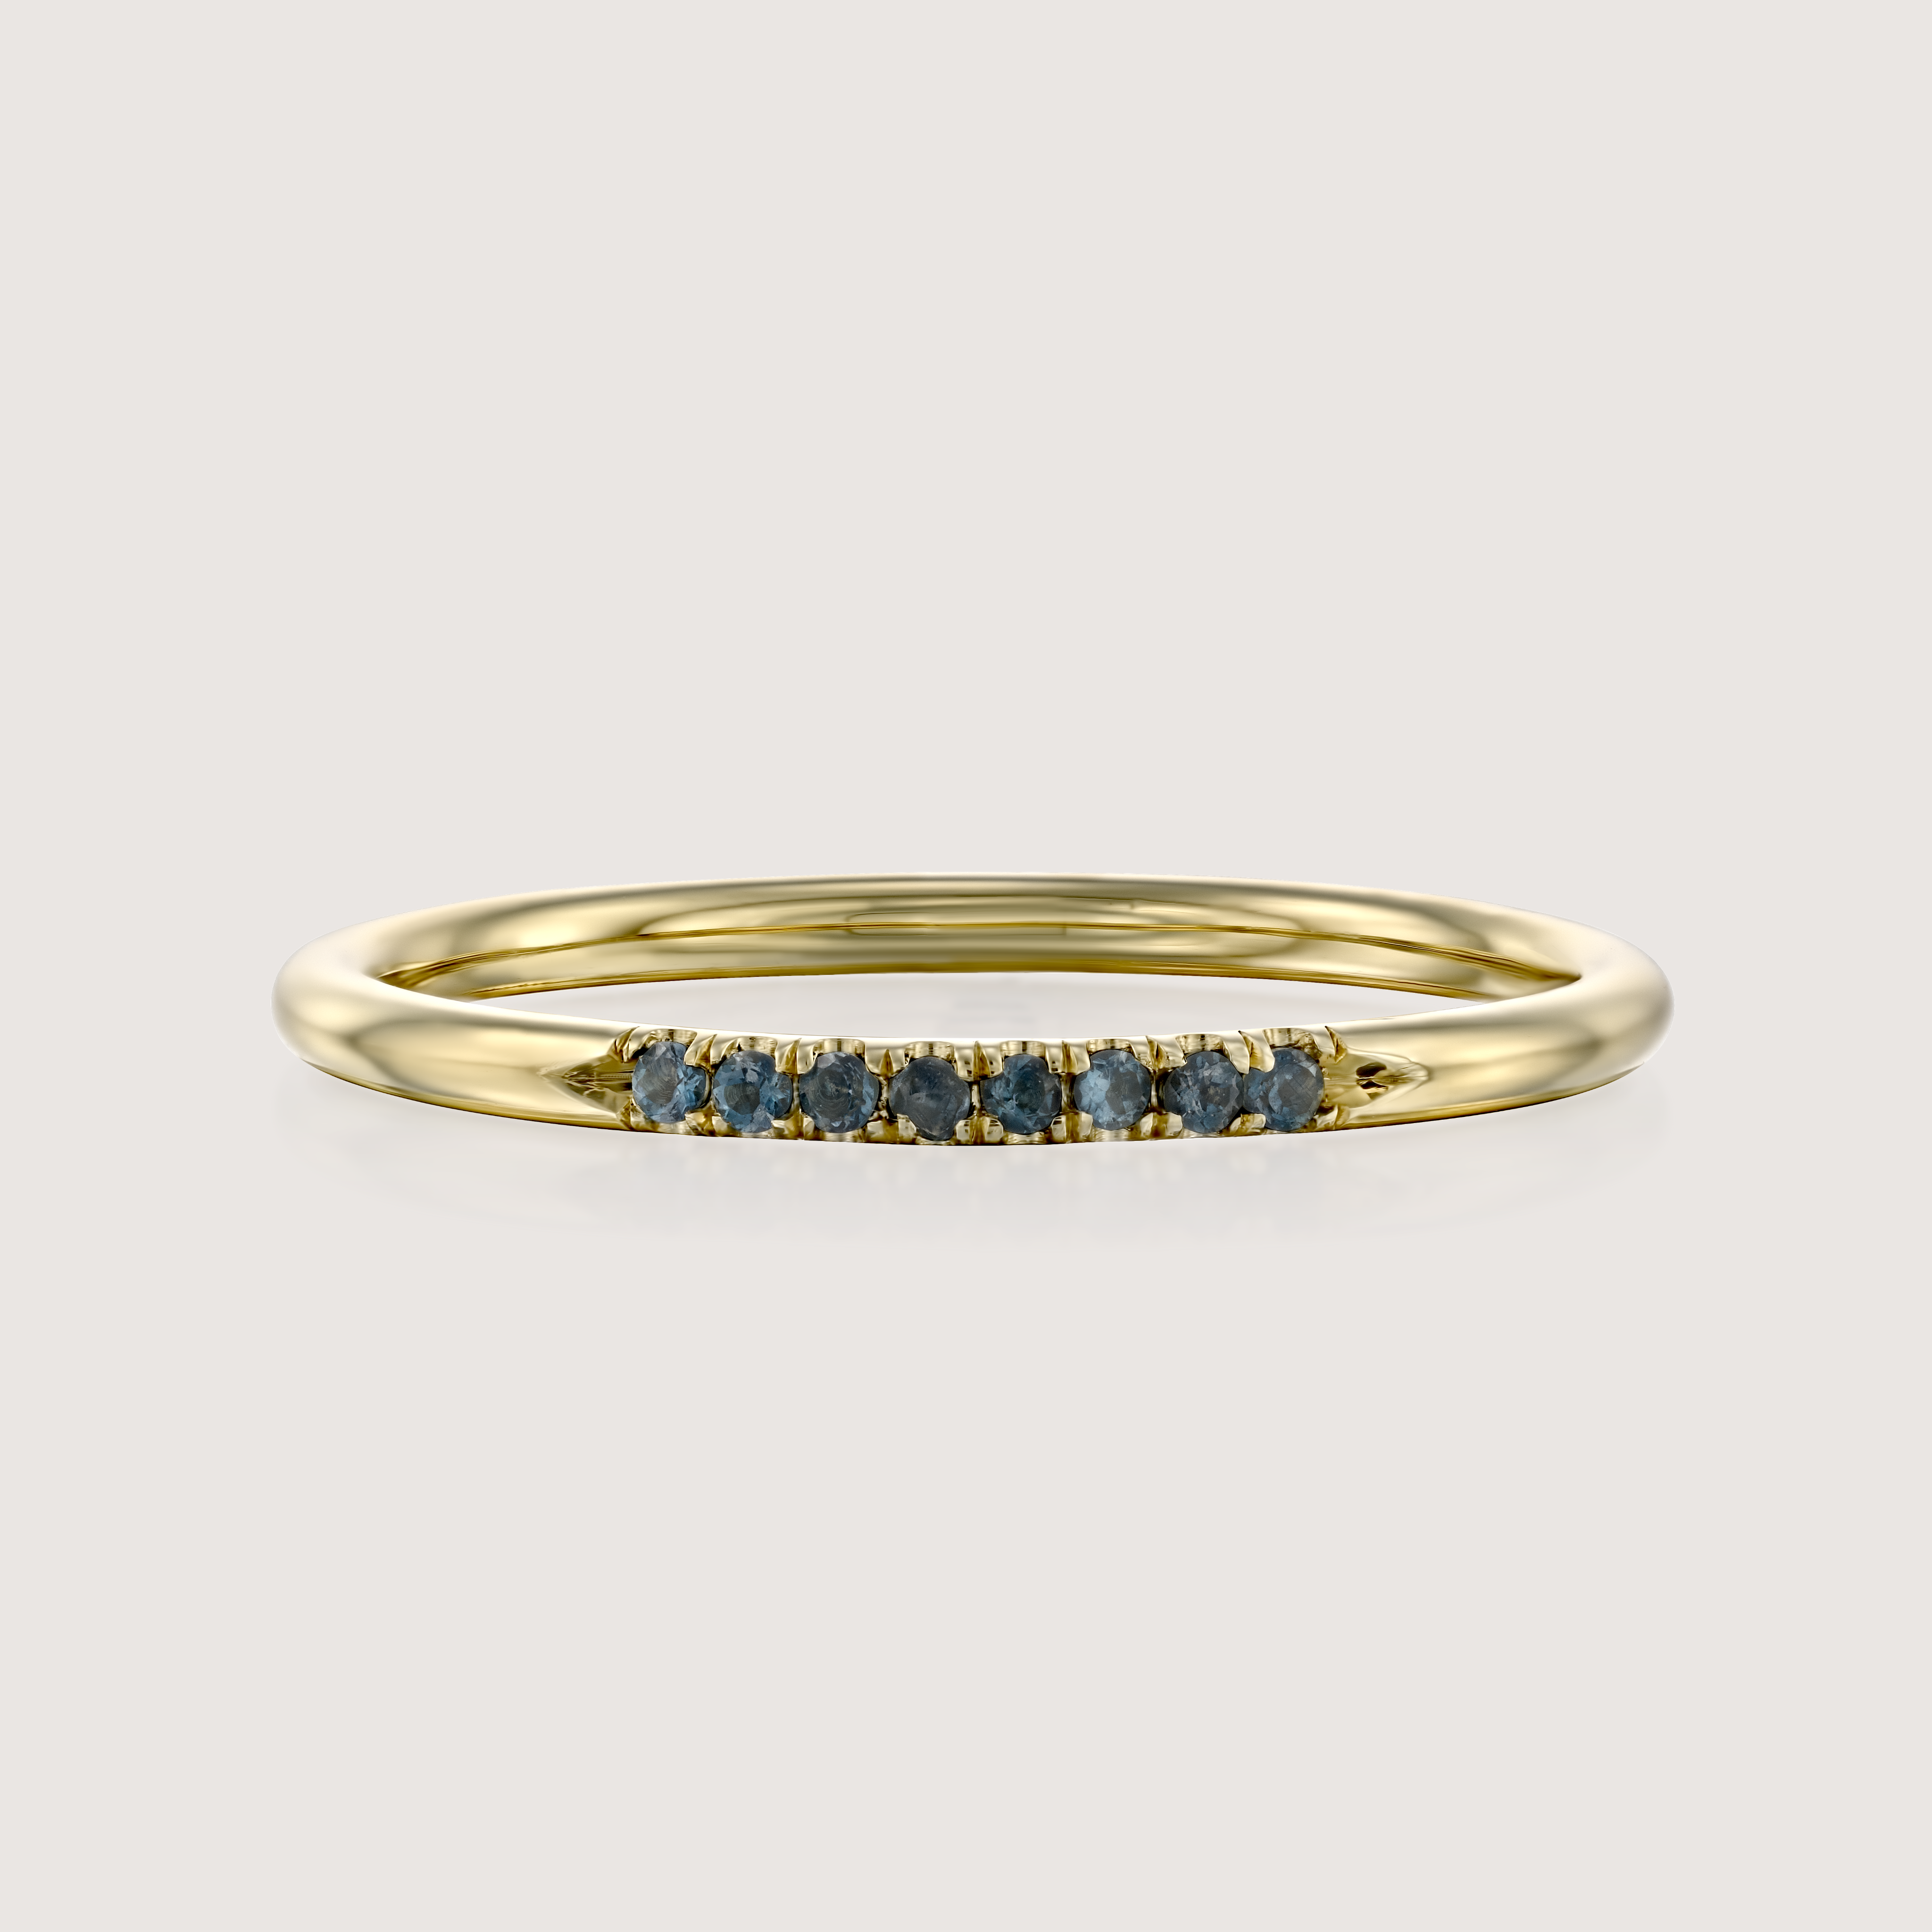 Kelly ring with Blue Topaz - London